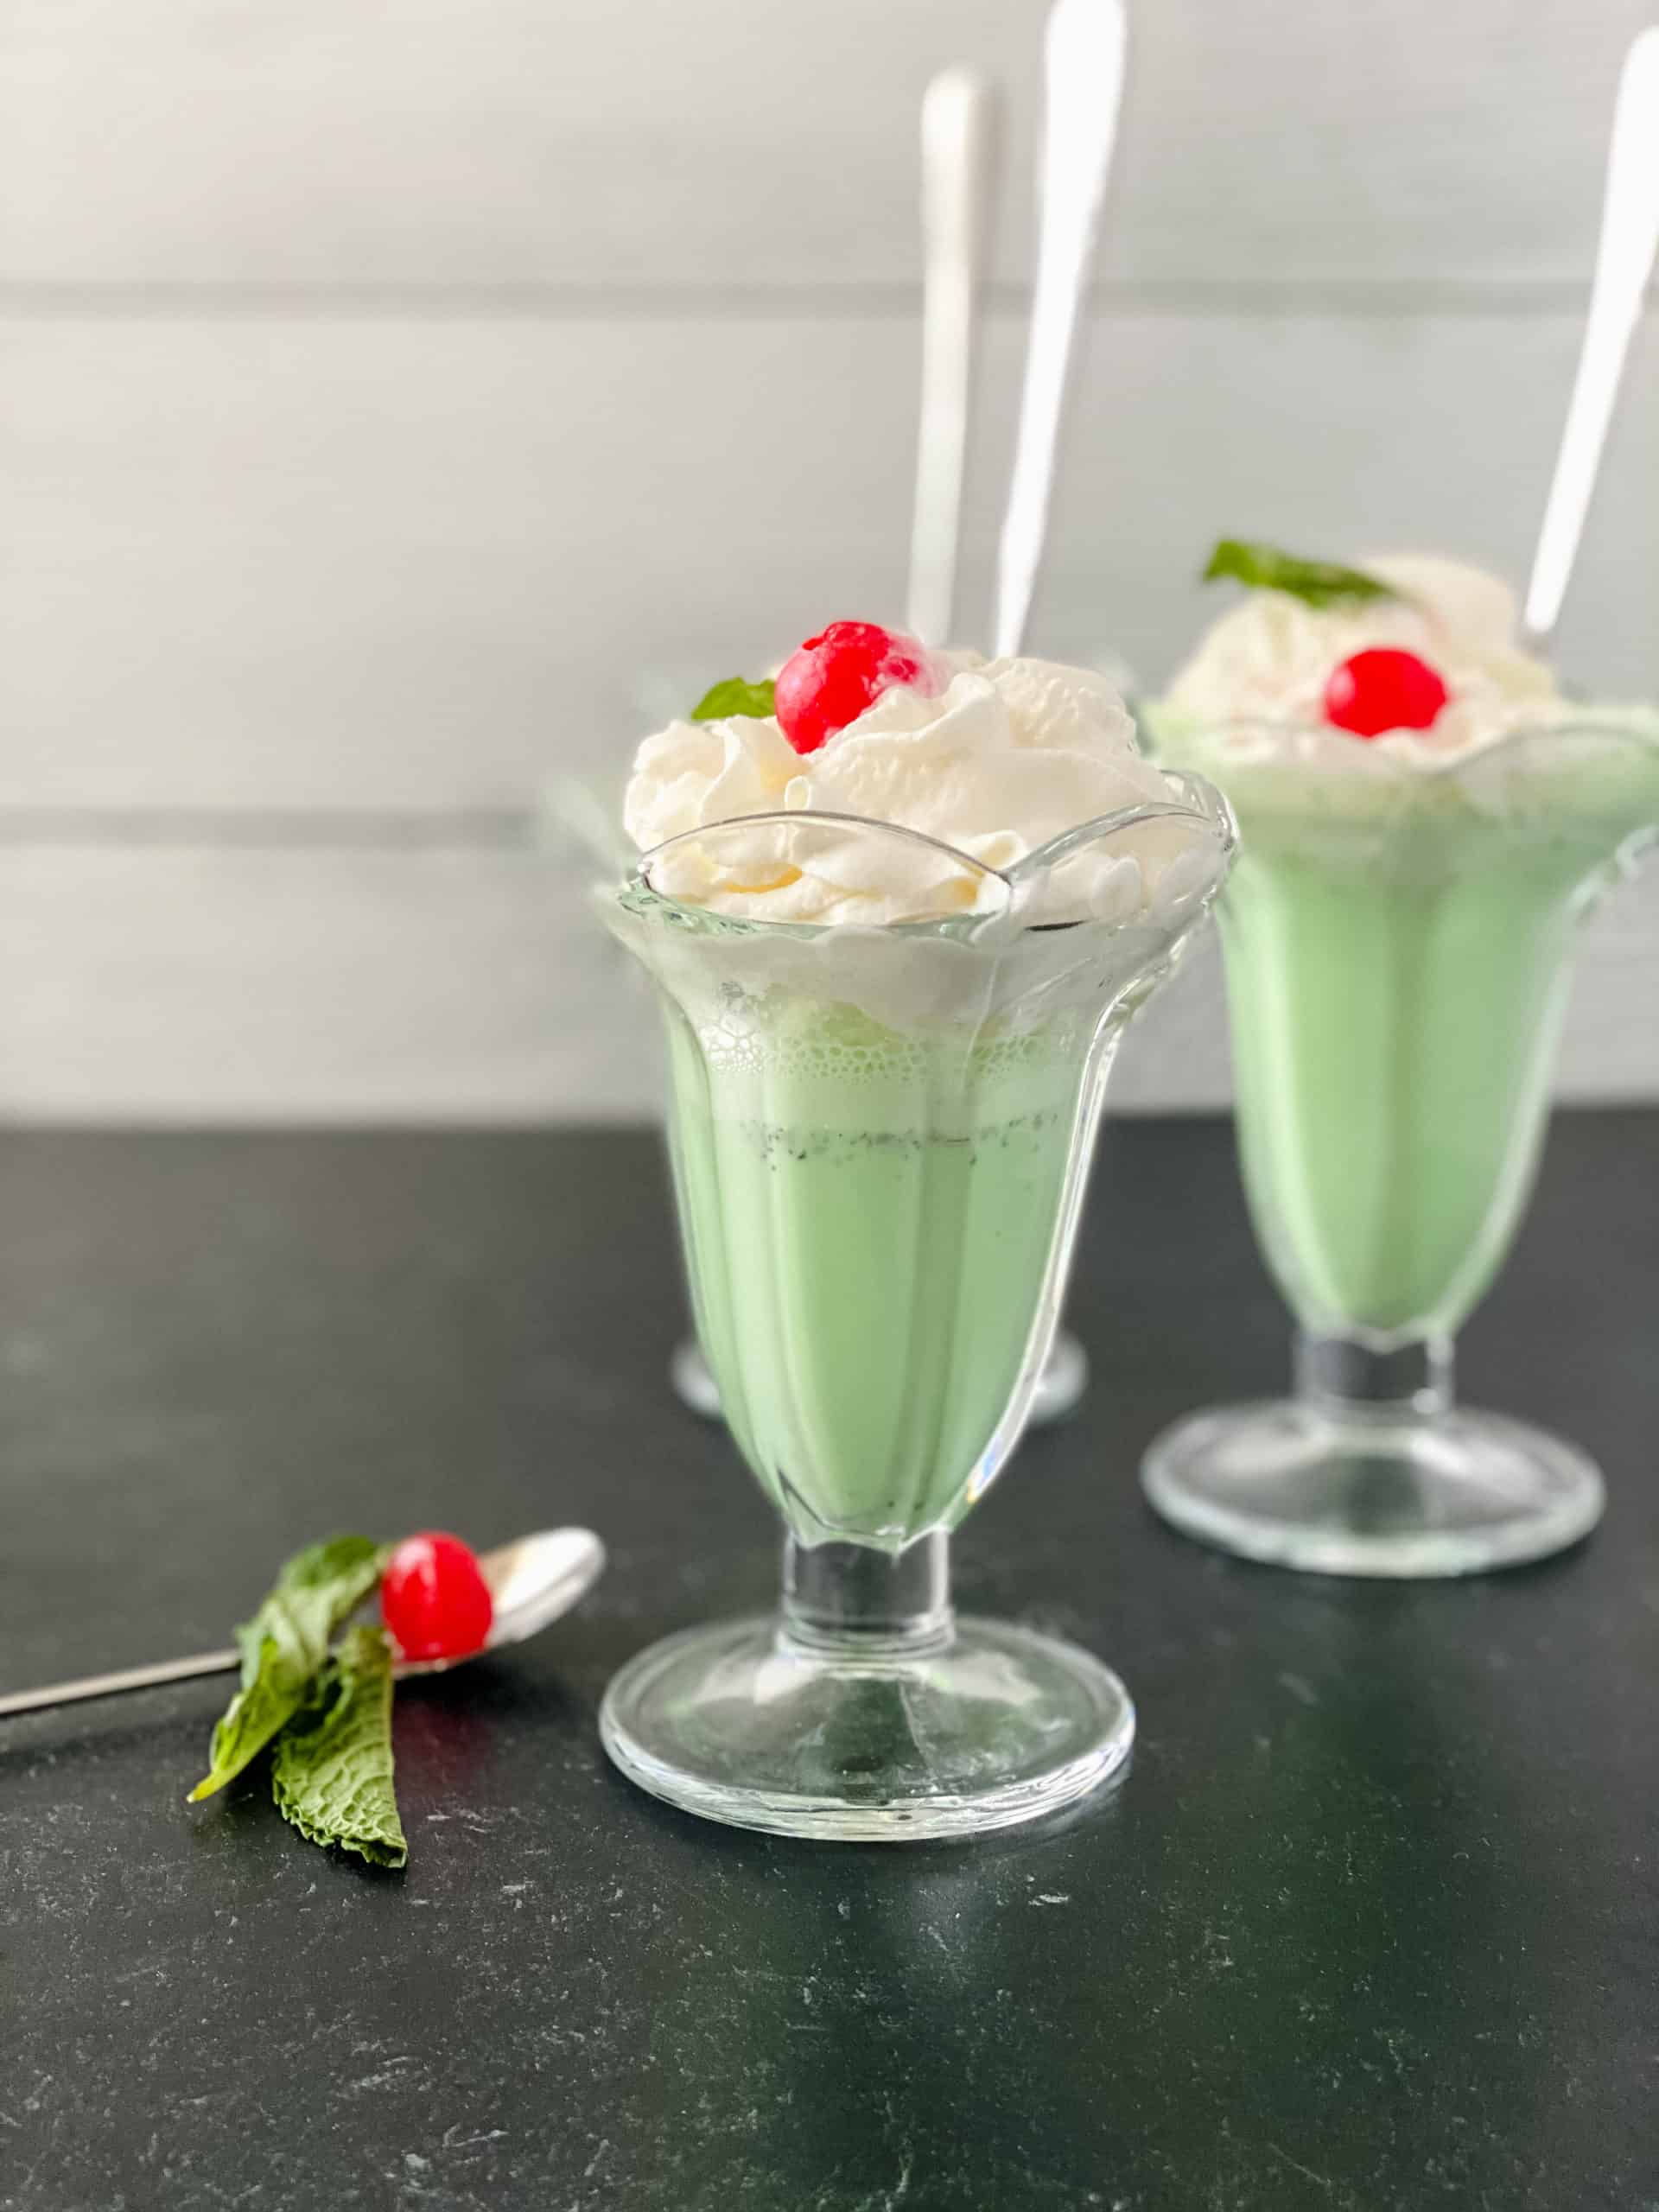 Two shakes on a black counter with a side of mint and a cherry on a spoon